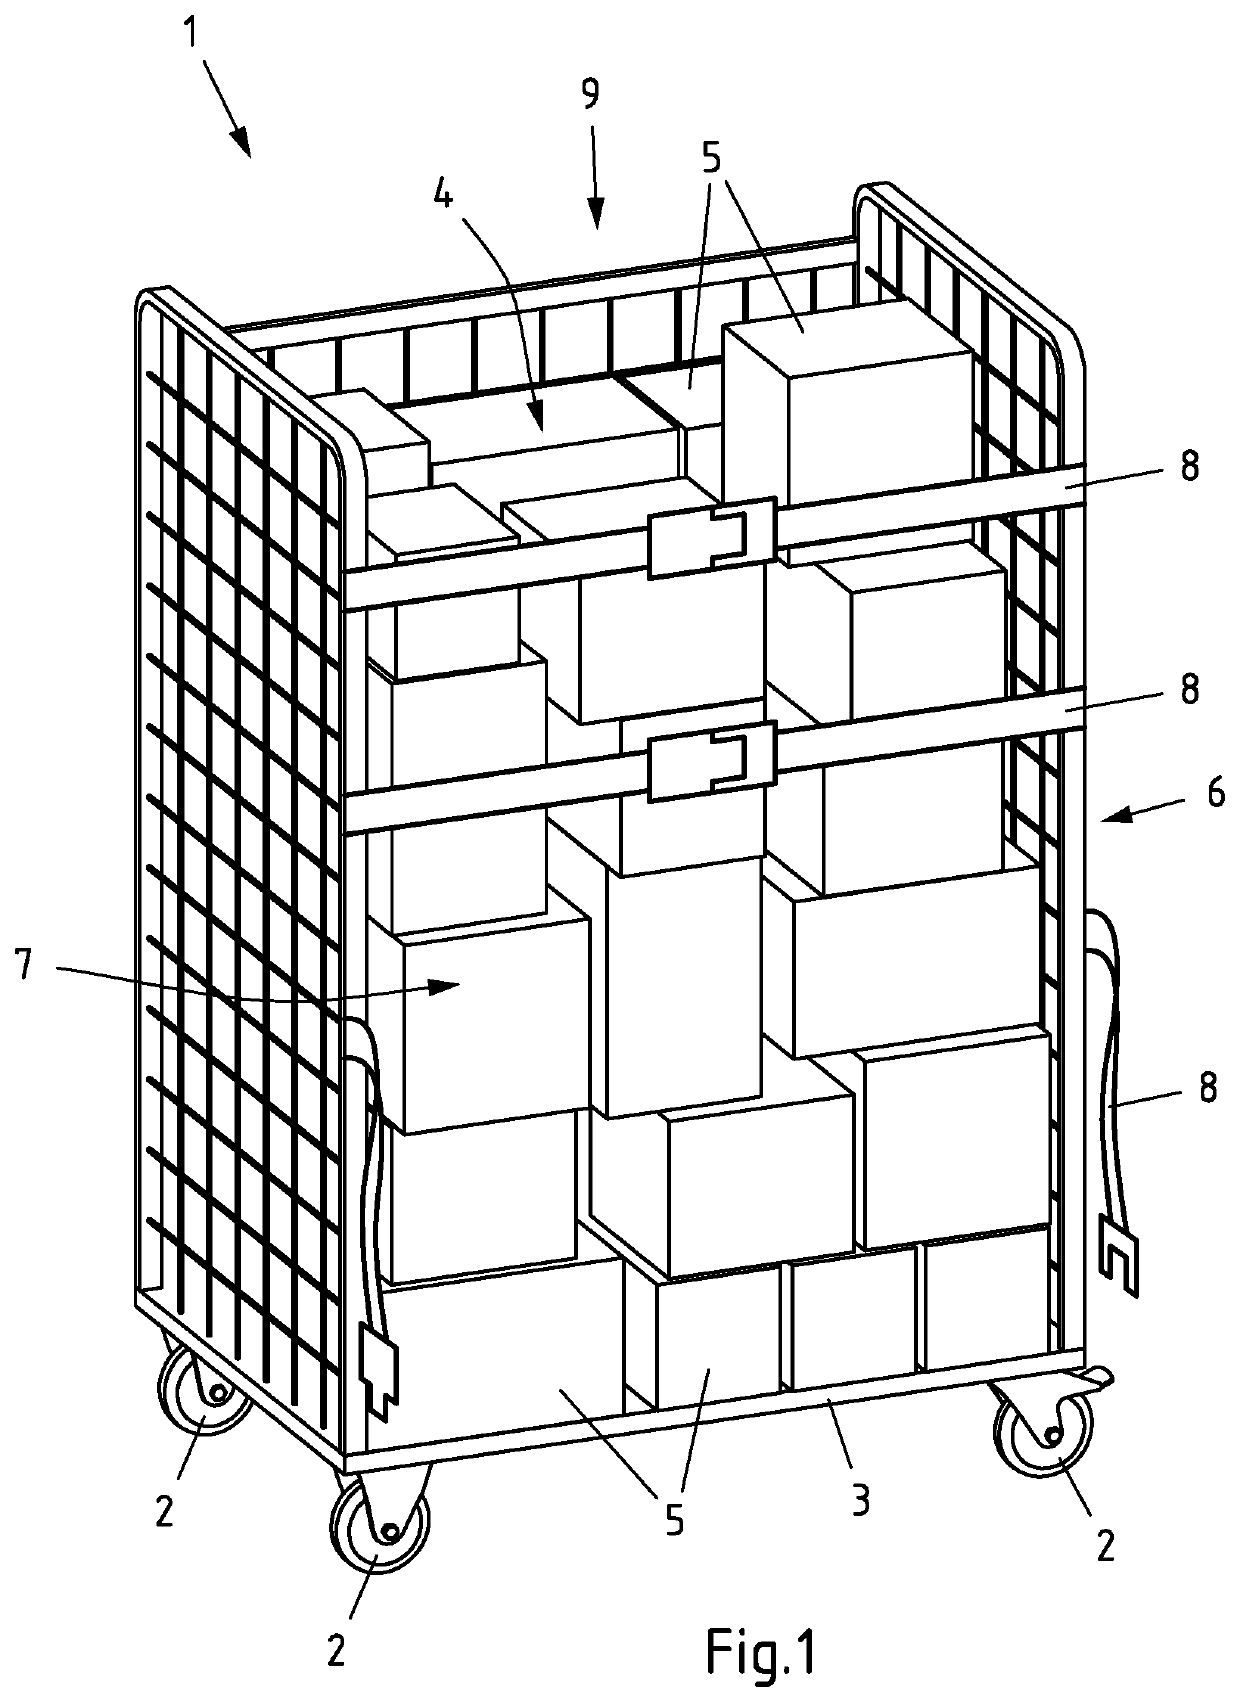 Method for unloading packages from a tipped container onto a conveyor belt